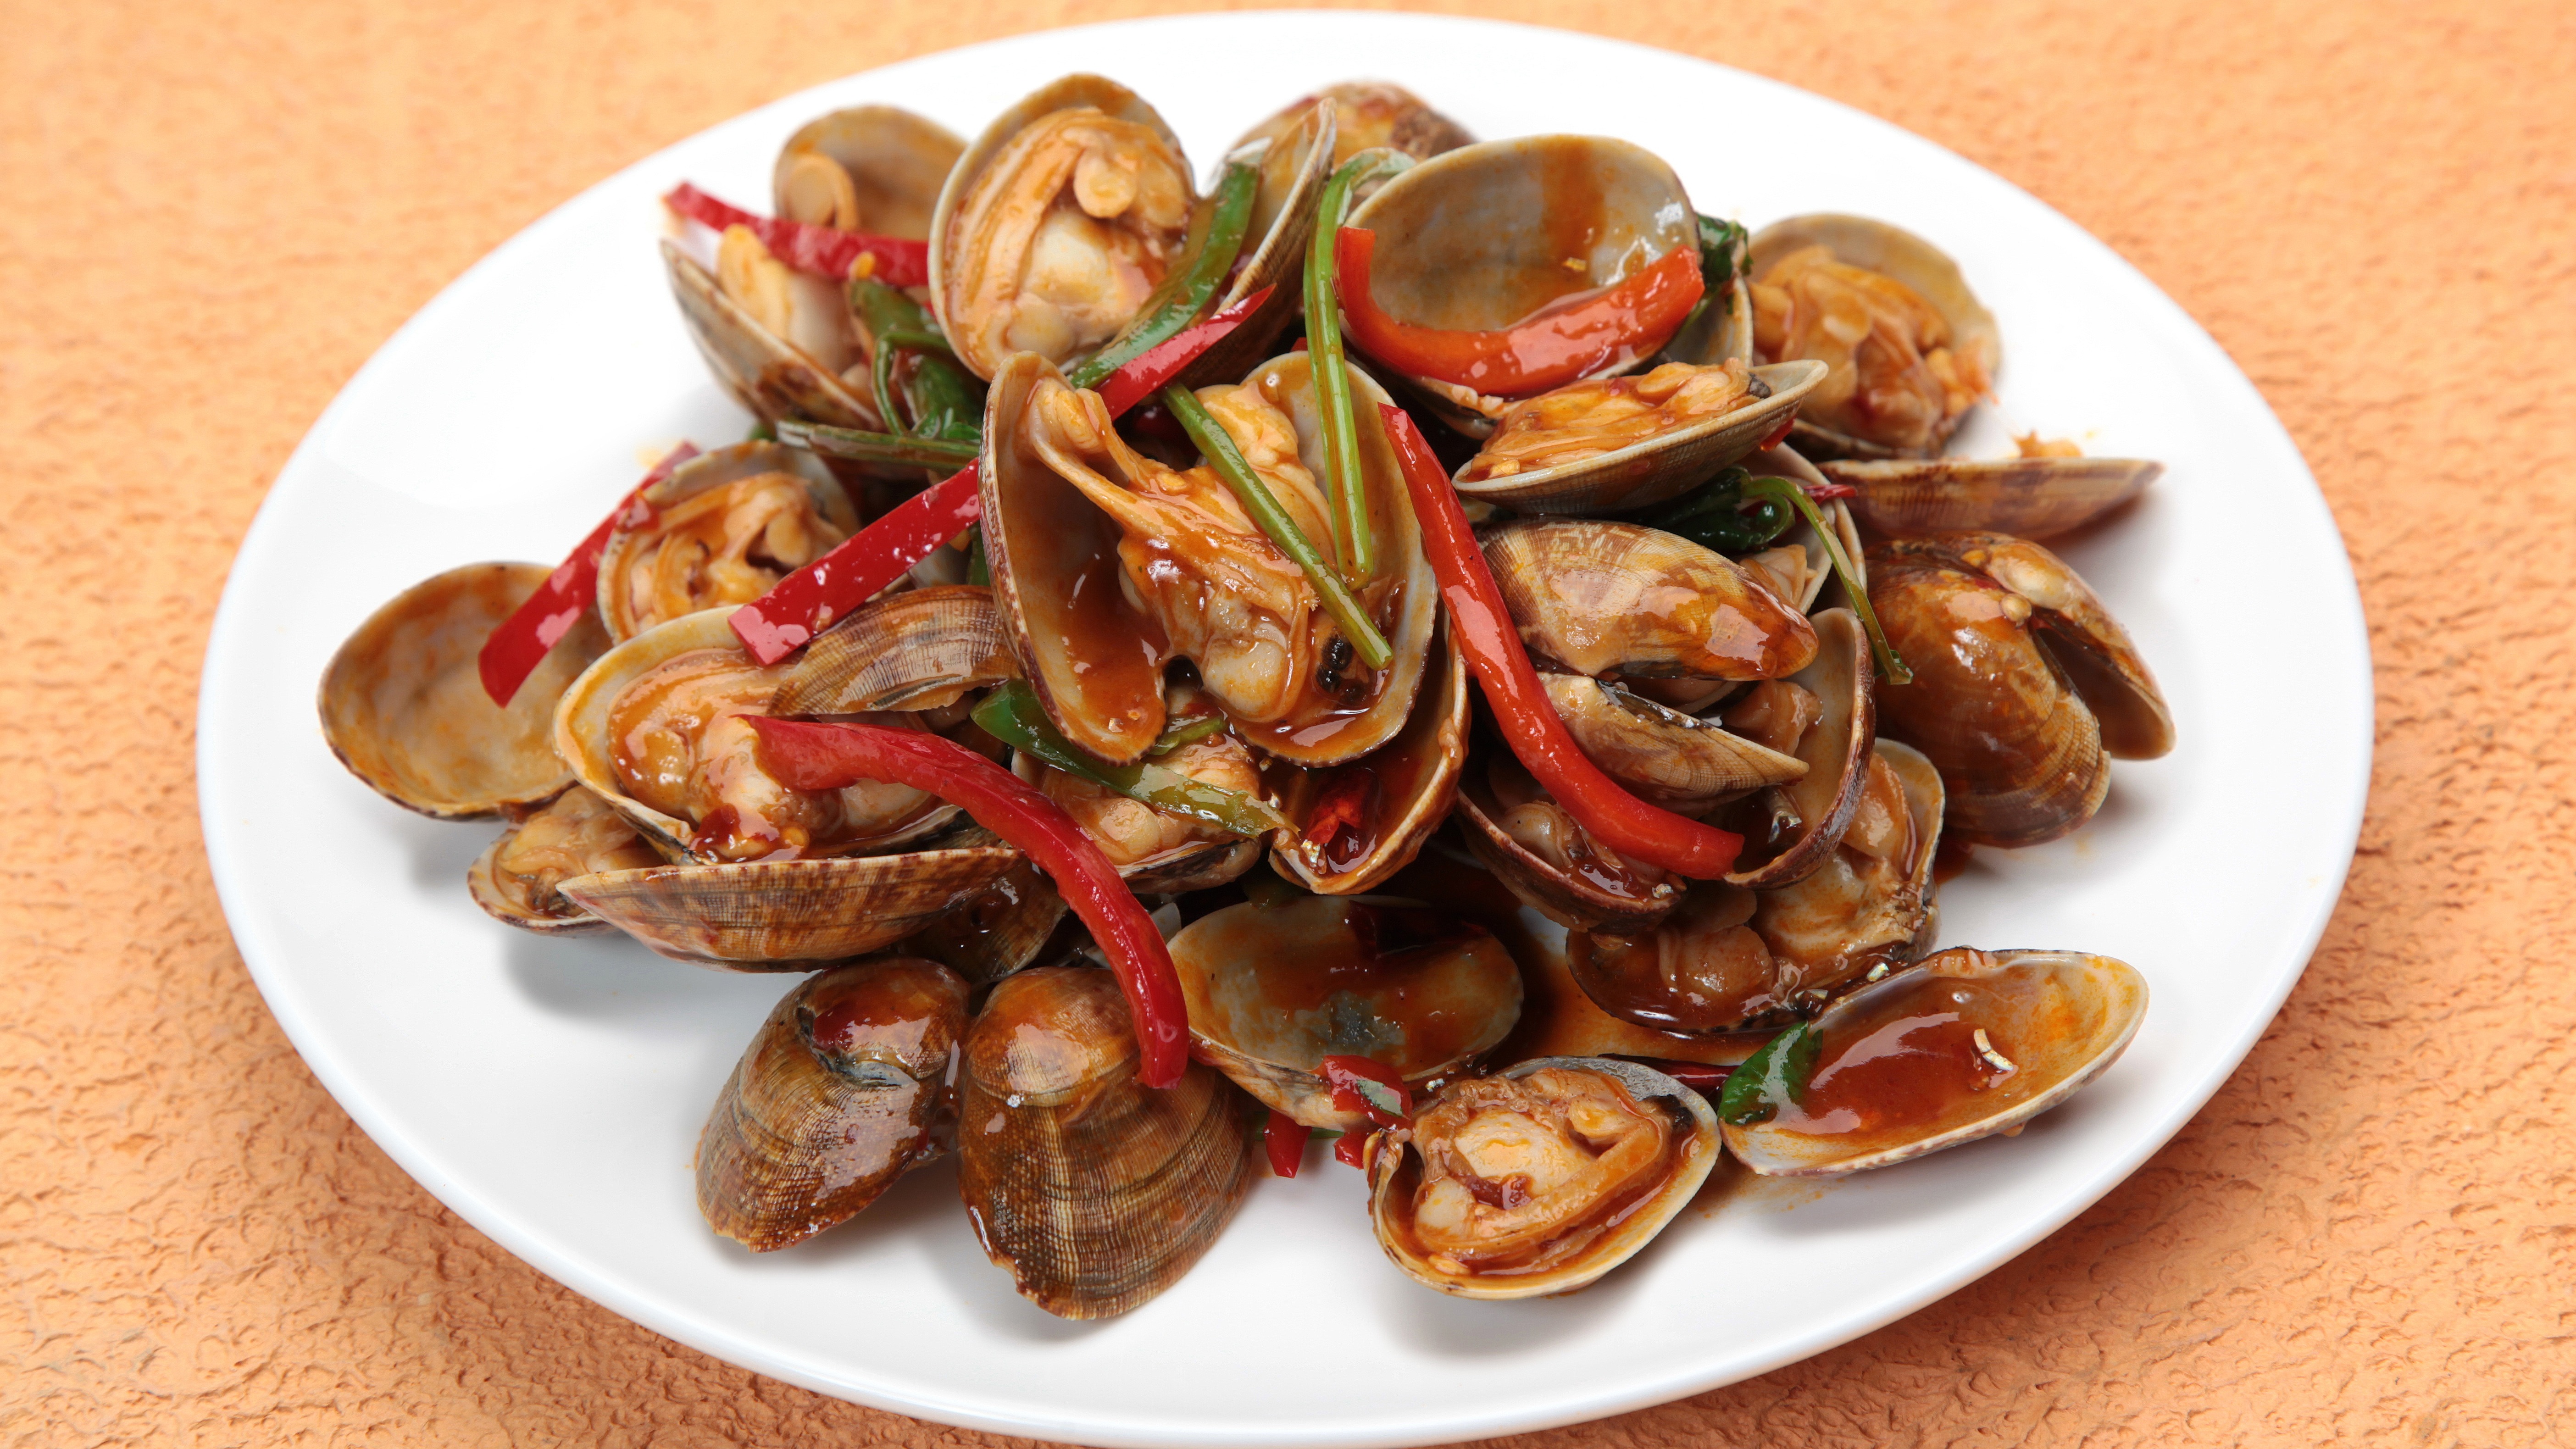 Spicy Clams with Brown Sauce 炒海瓜子